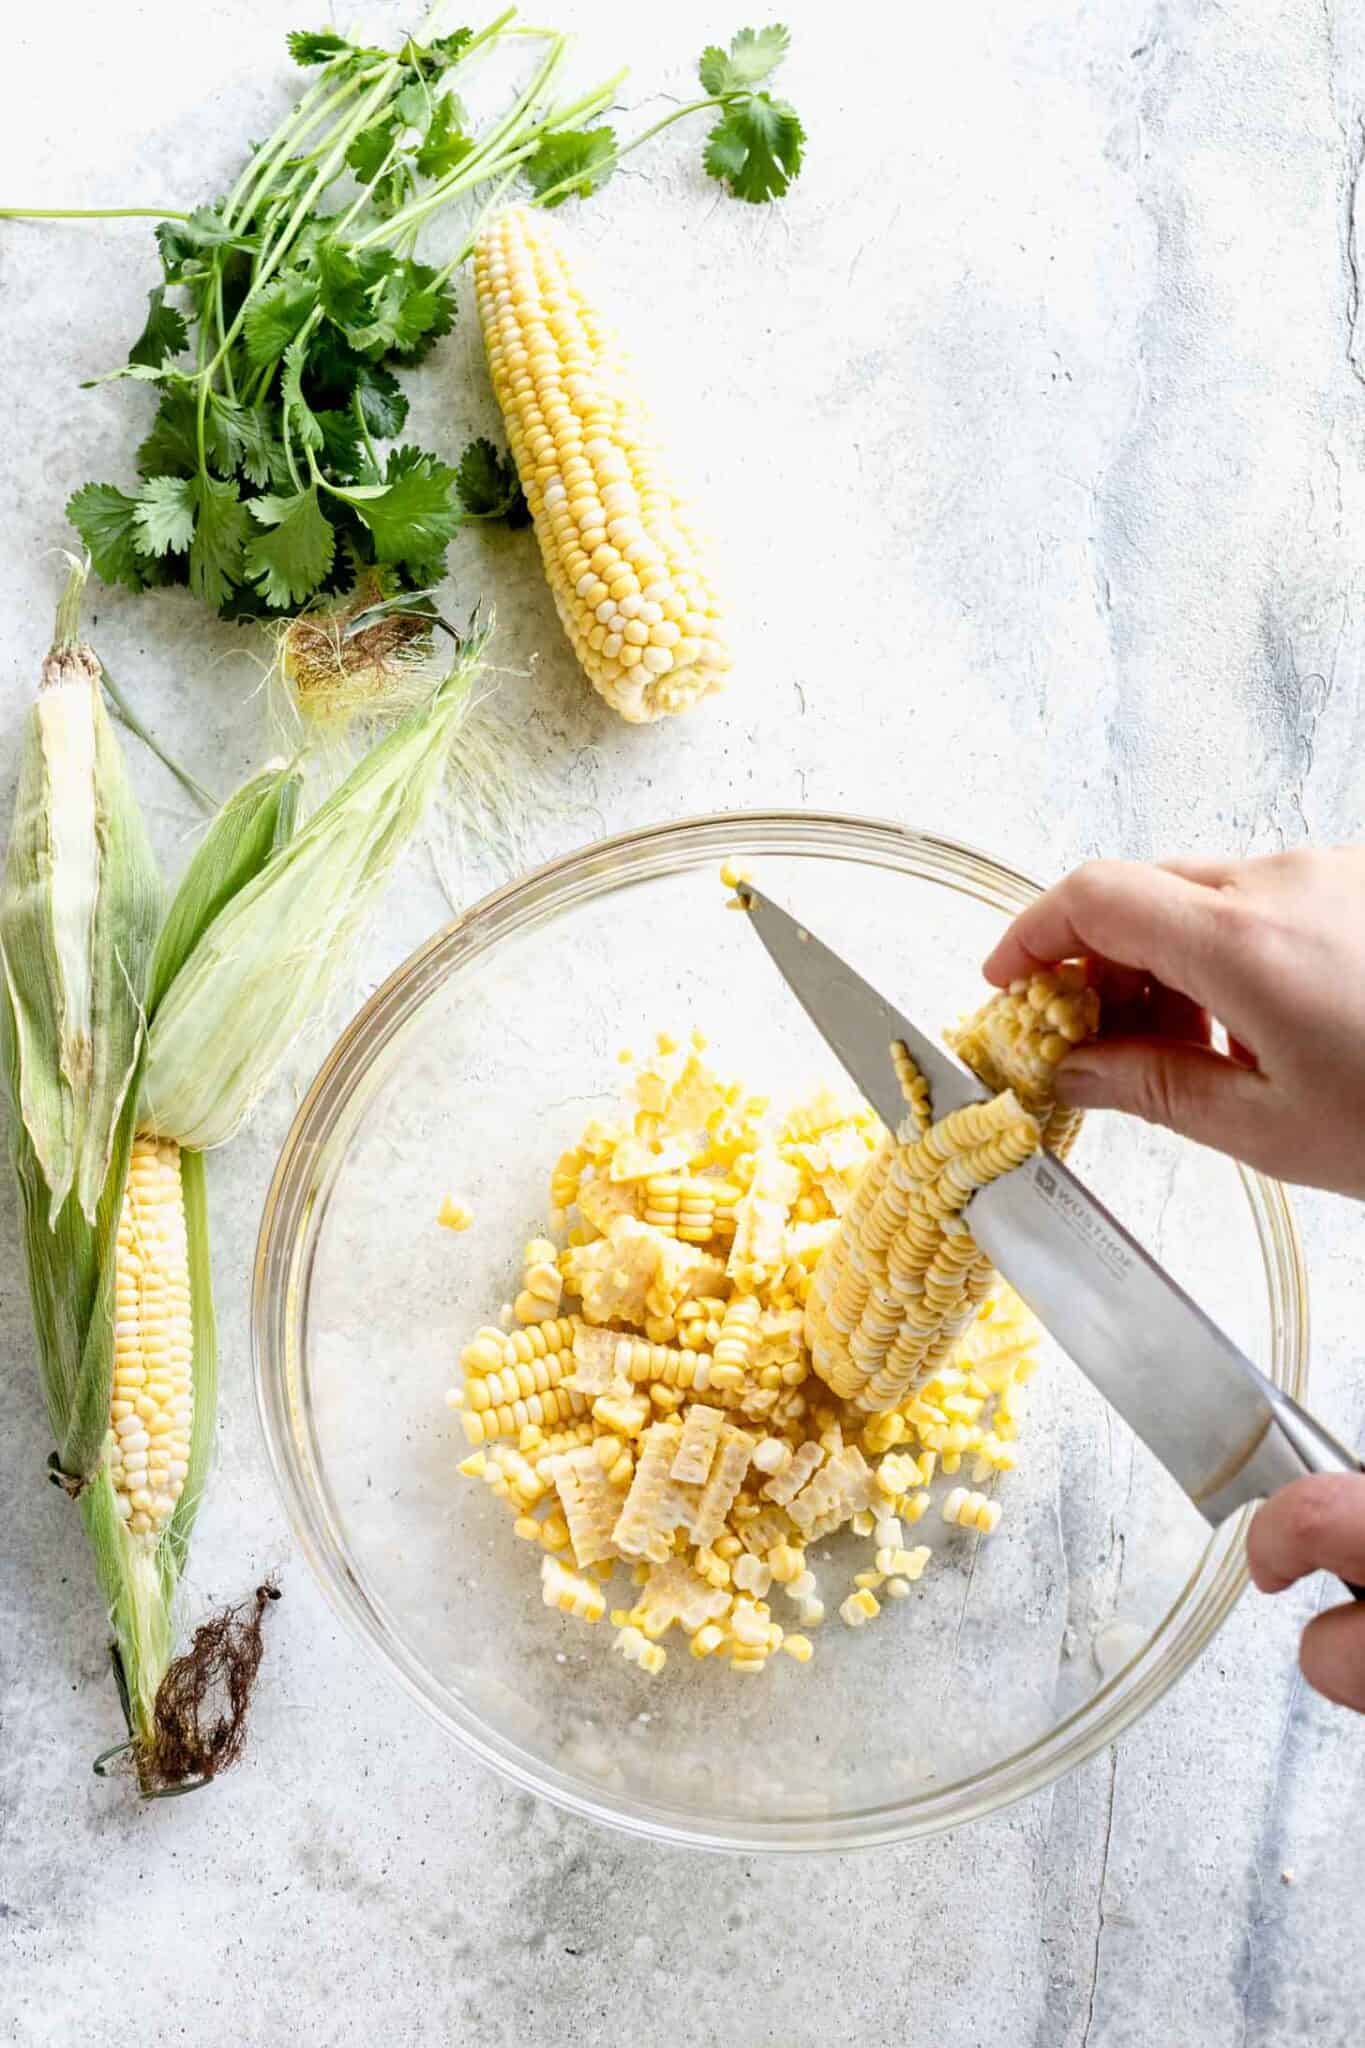 cutting the kernels off the cob into a bowl